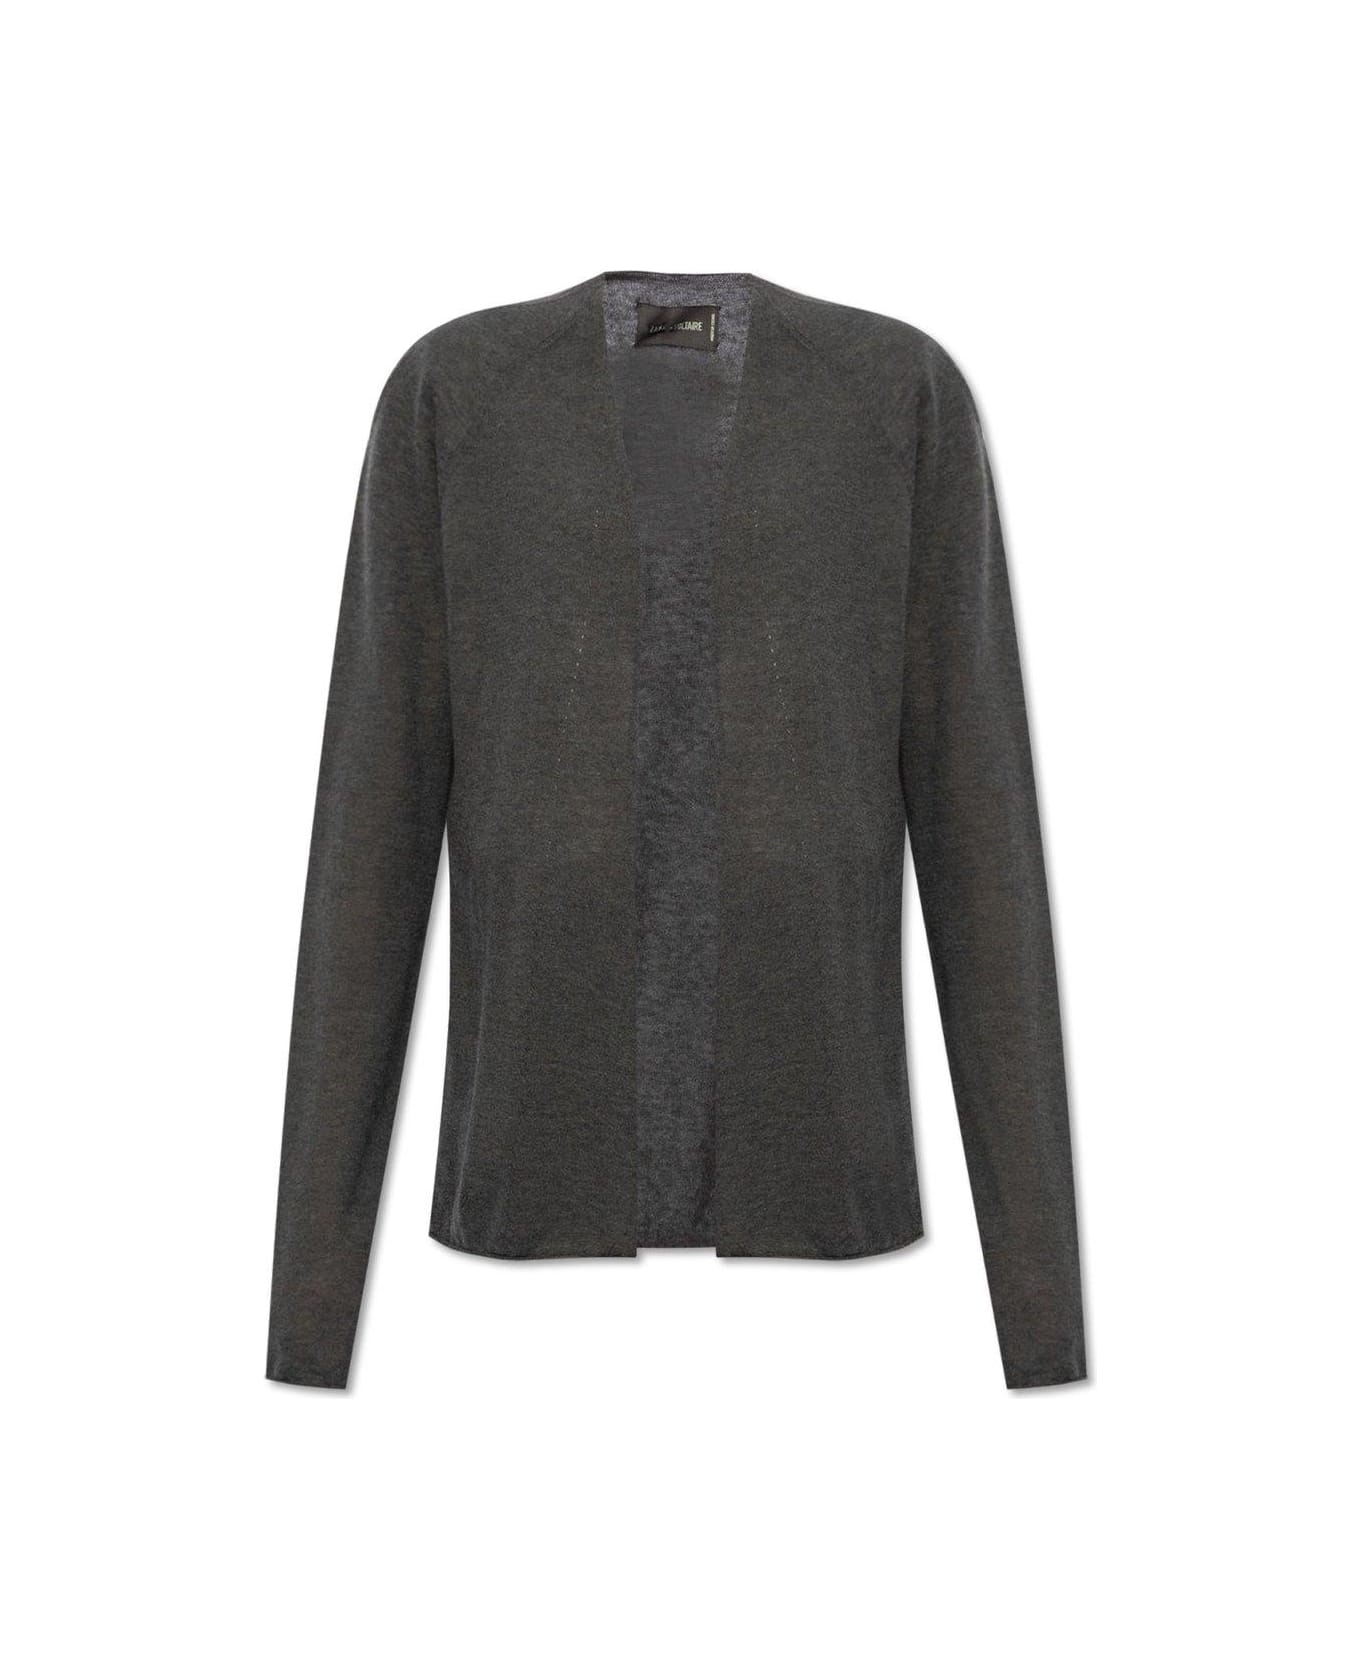 Zadig & Voltaire Open Front Knitted Cardigan - GREY/GREEN カーディガン